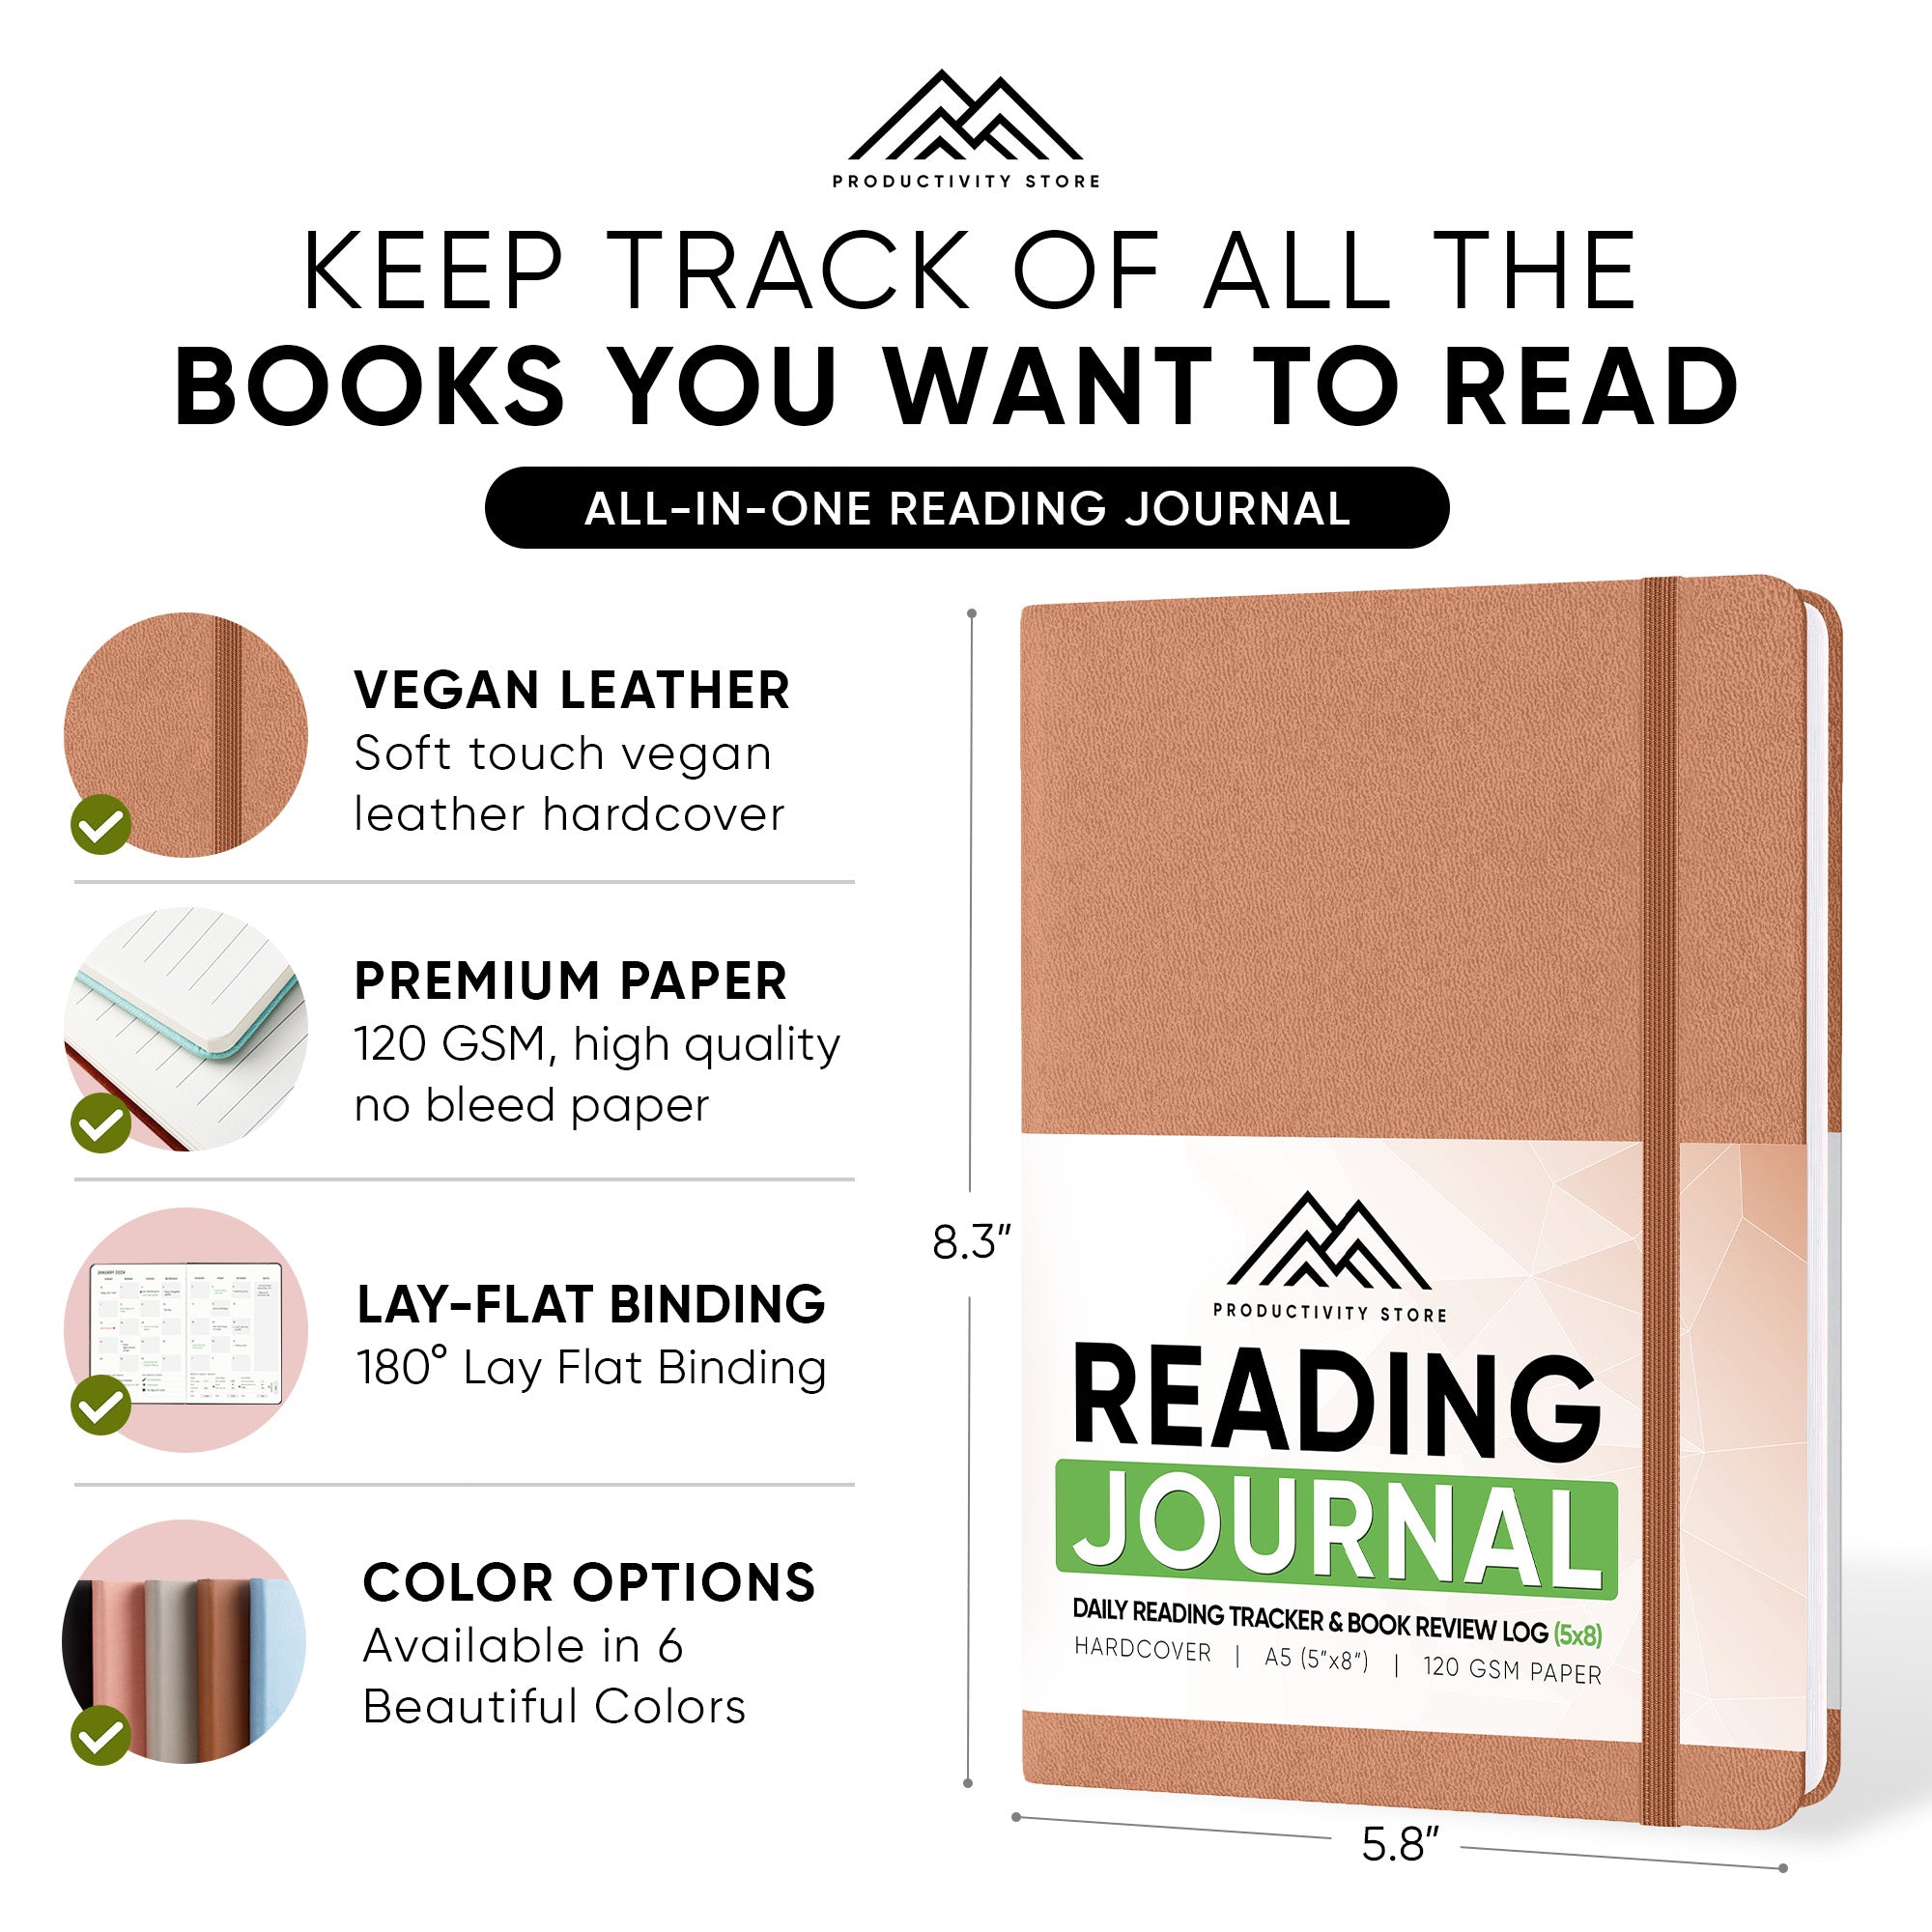 Packing this reading journal for a book lover who wants to keep track , reading journal